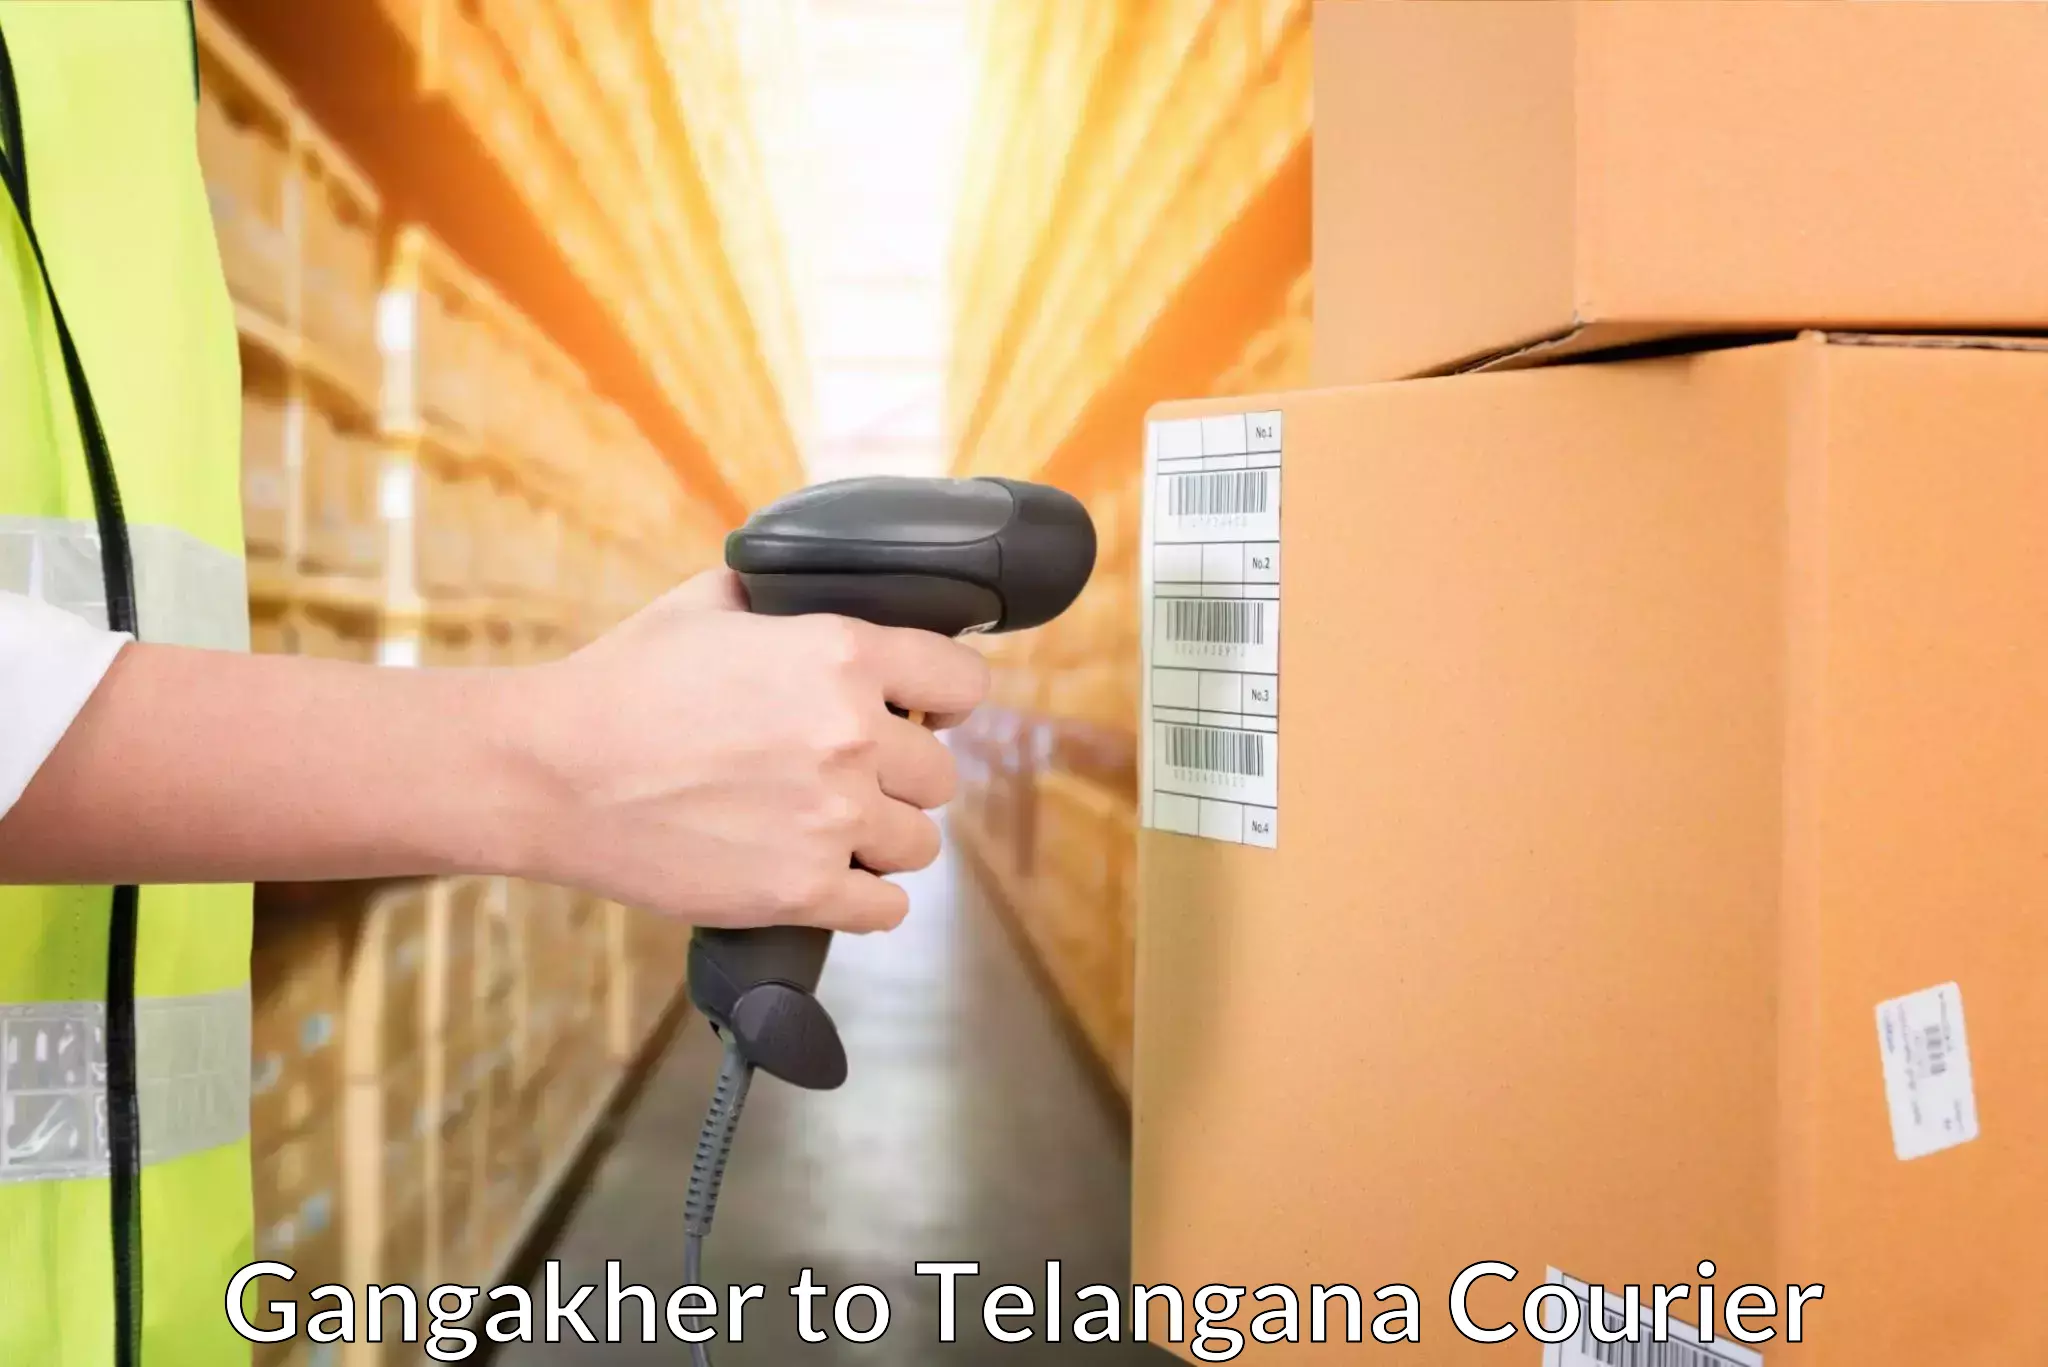 Express courier facilities in Gangakher to Zahirabad